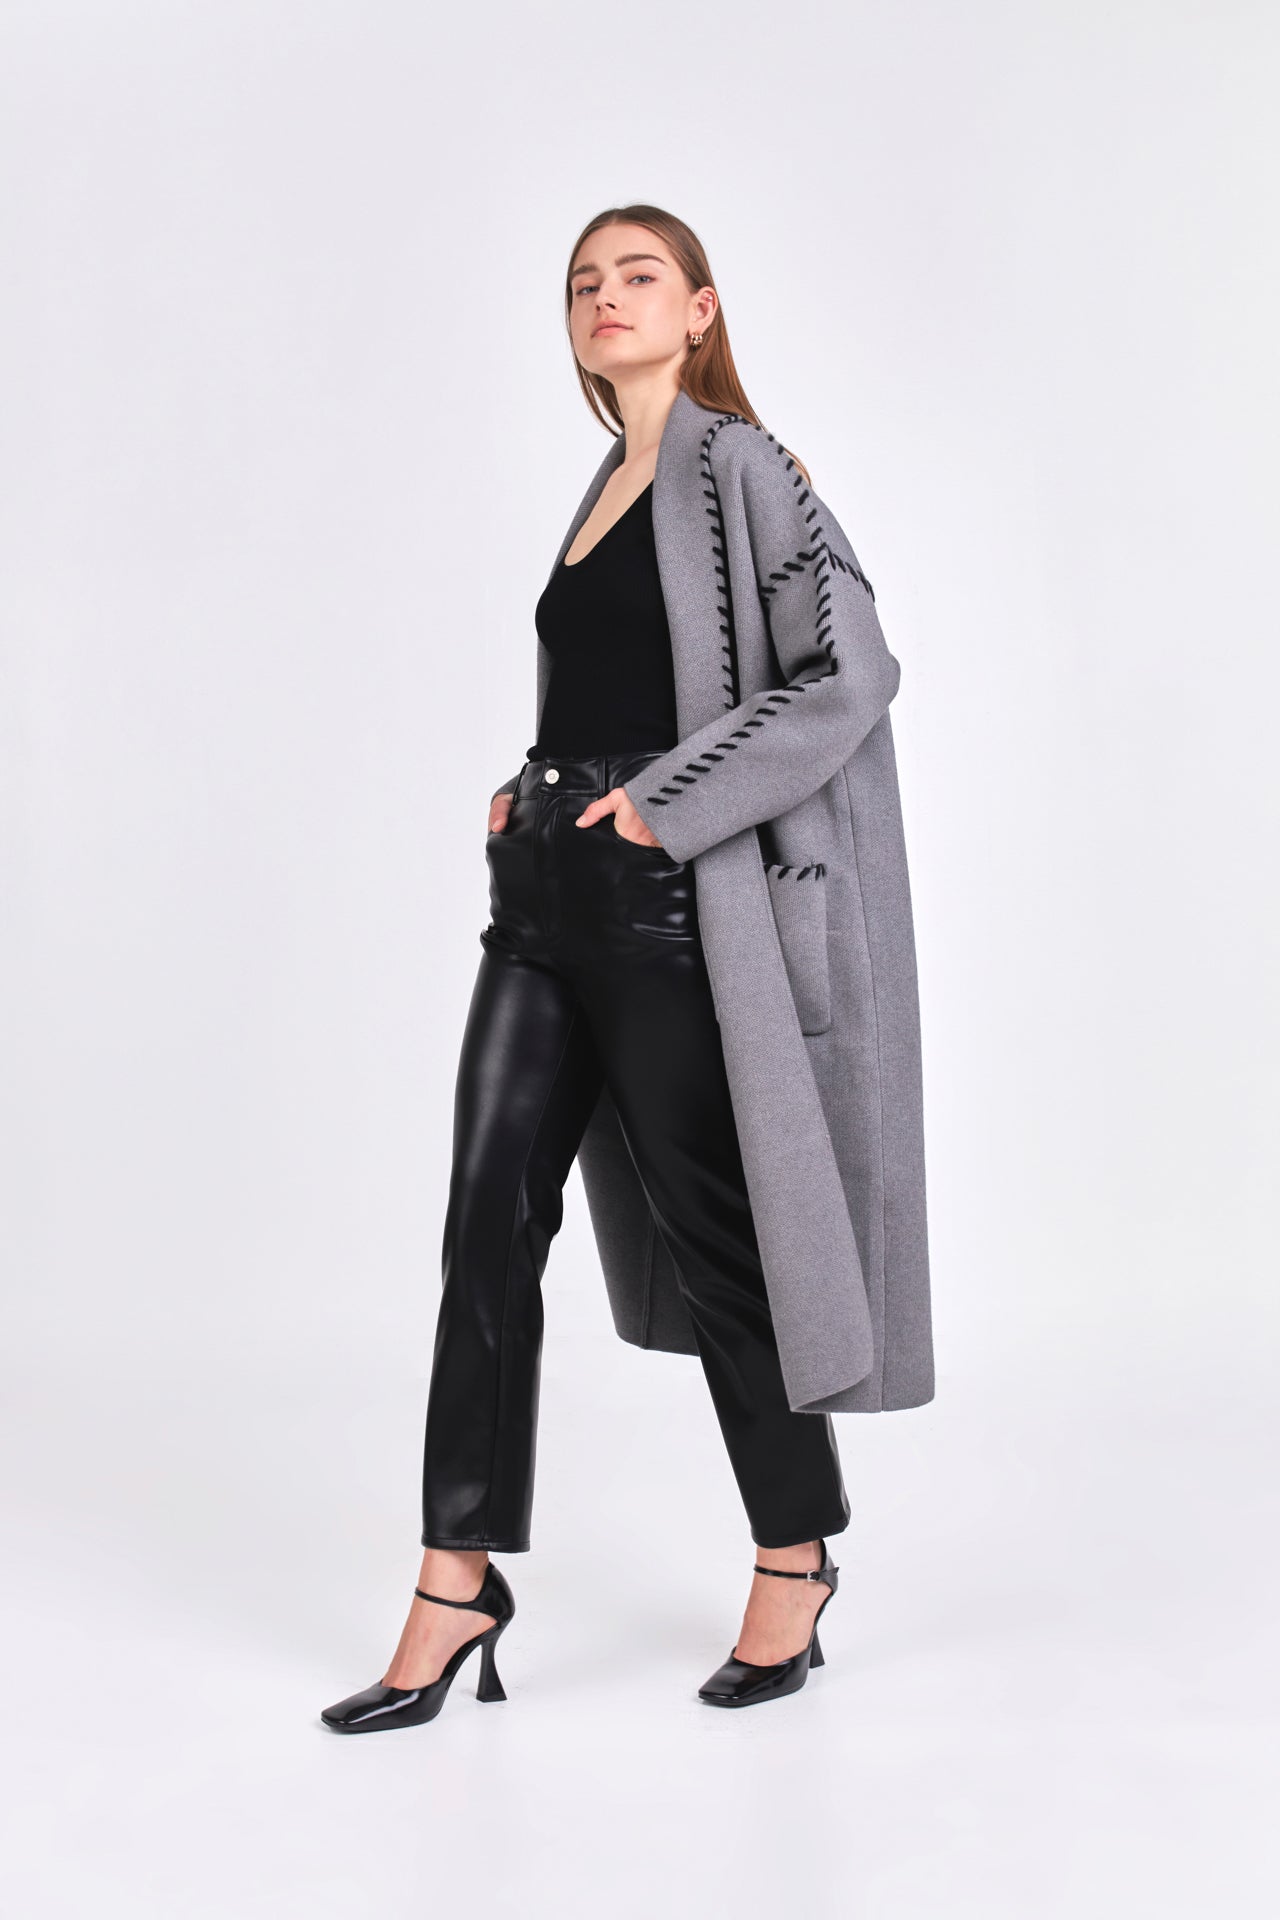 ENDLESS ROSE - Whip Stitched Long Knit Cardigan - COATS available at Objectrare